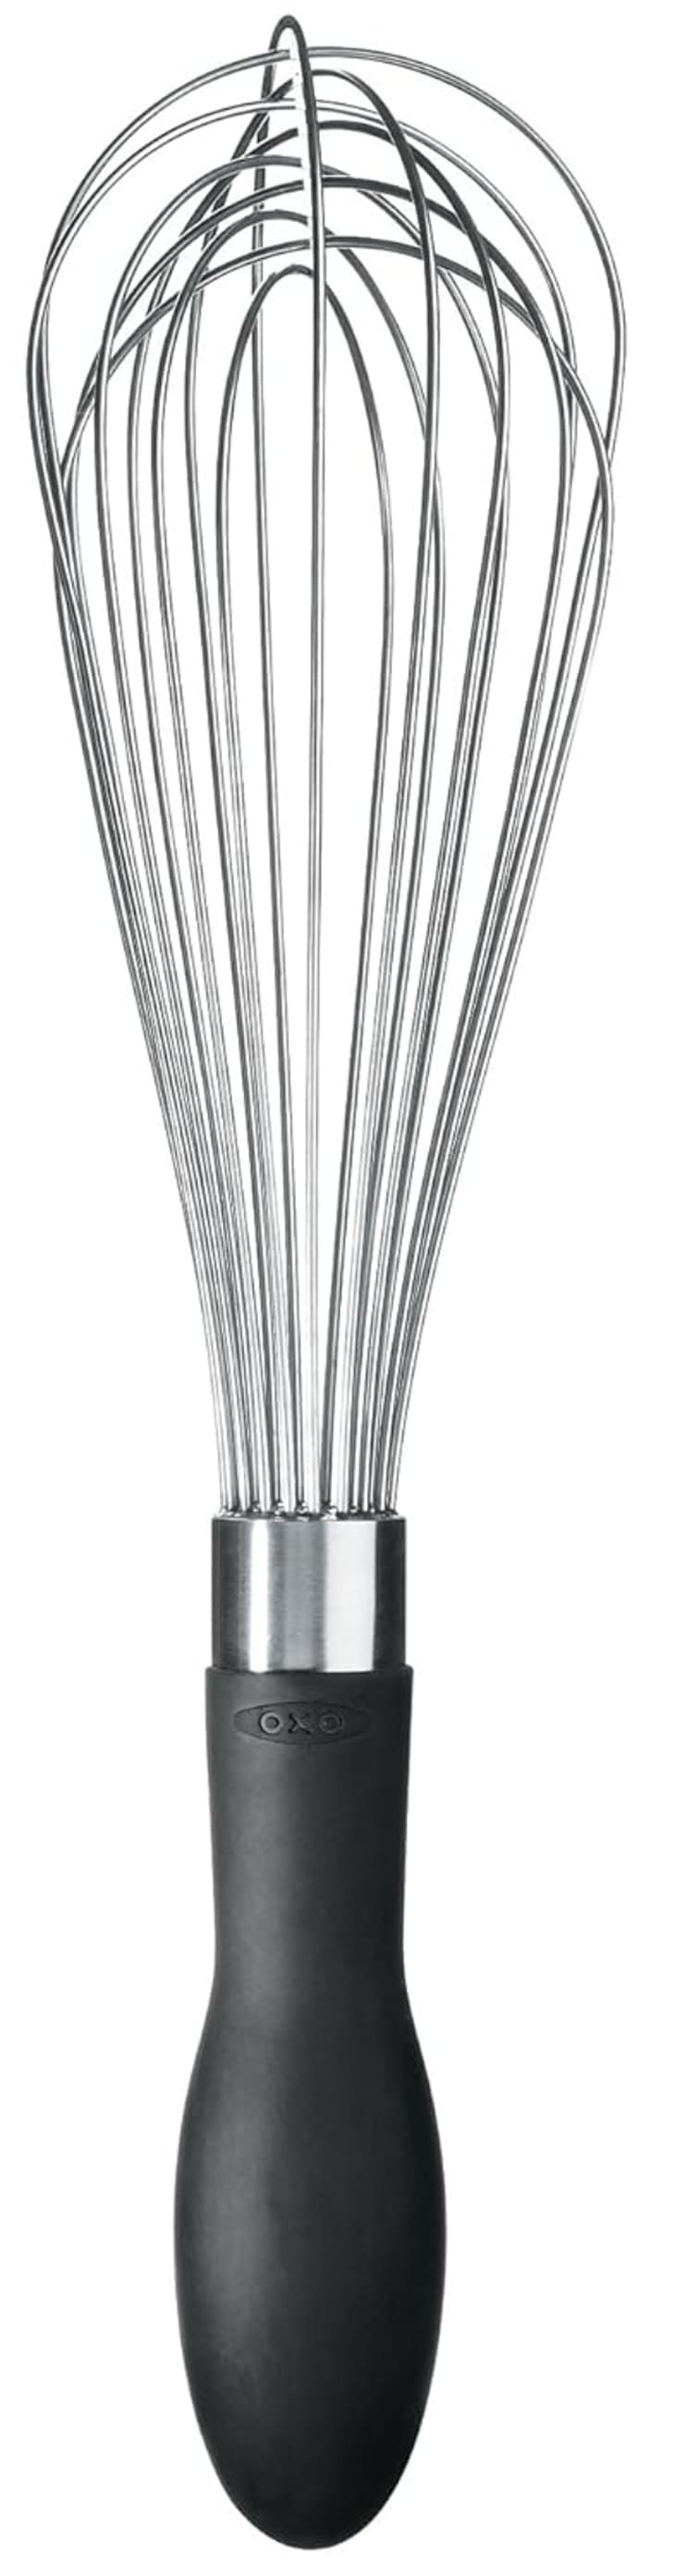 Product Image: OXO Good Grips Balloon Whisk